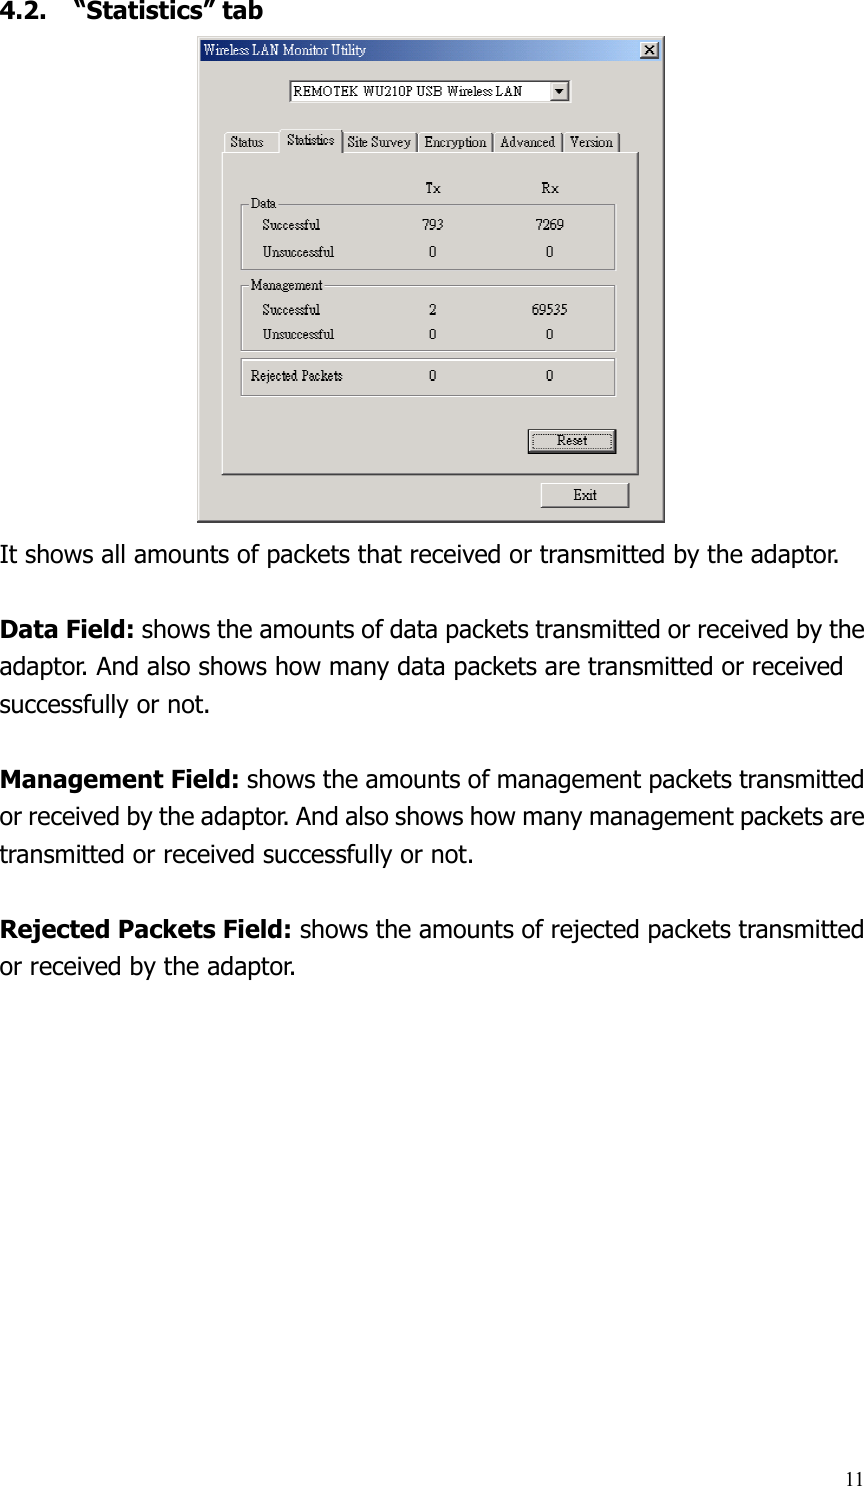  114.2. “Statistics” tab It shows all amounts of packets that received or transmitted by the adaptor.  Data Field: shows the amounts of data packets transmitted or received by the adaptor. And also shows how many data packets are transmitted or received successfully or not.  Management Field: shows the amounts of management packets transmitted or received by the adaptor. And also shows how many management packets are transmitted or received successfully or not.  Rejected Packets Field: shows the amounts of rejected packets transmitted or received by the adaptor.  